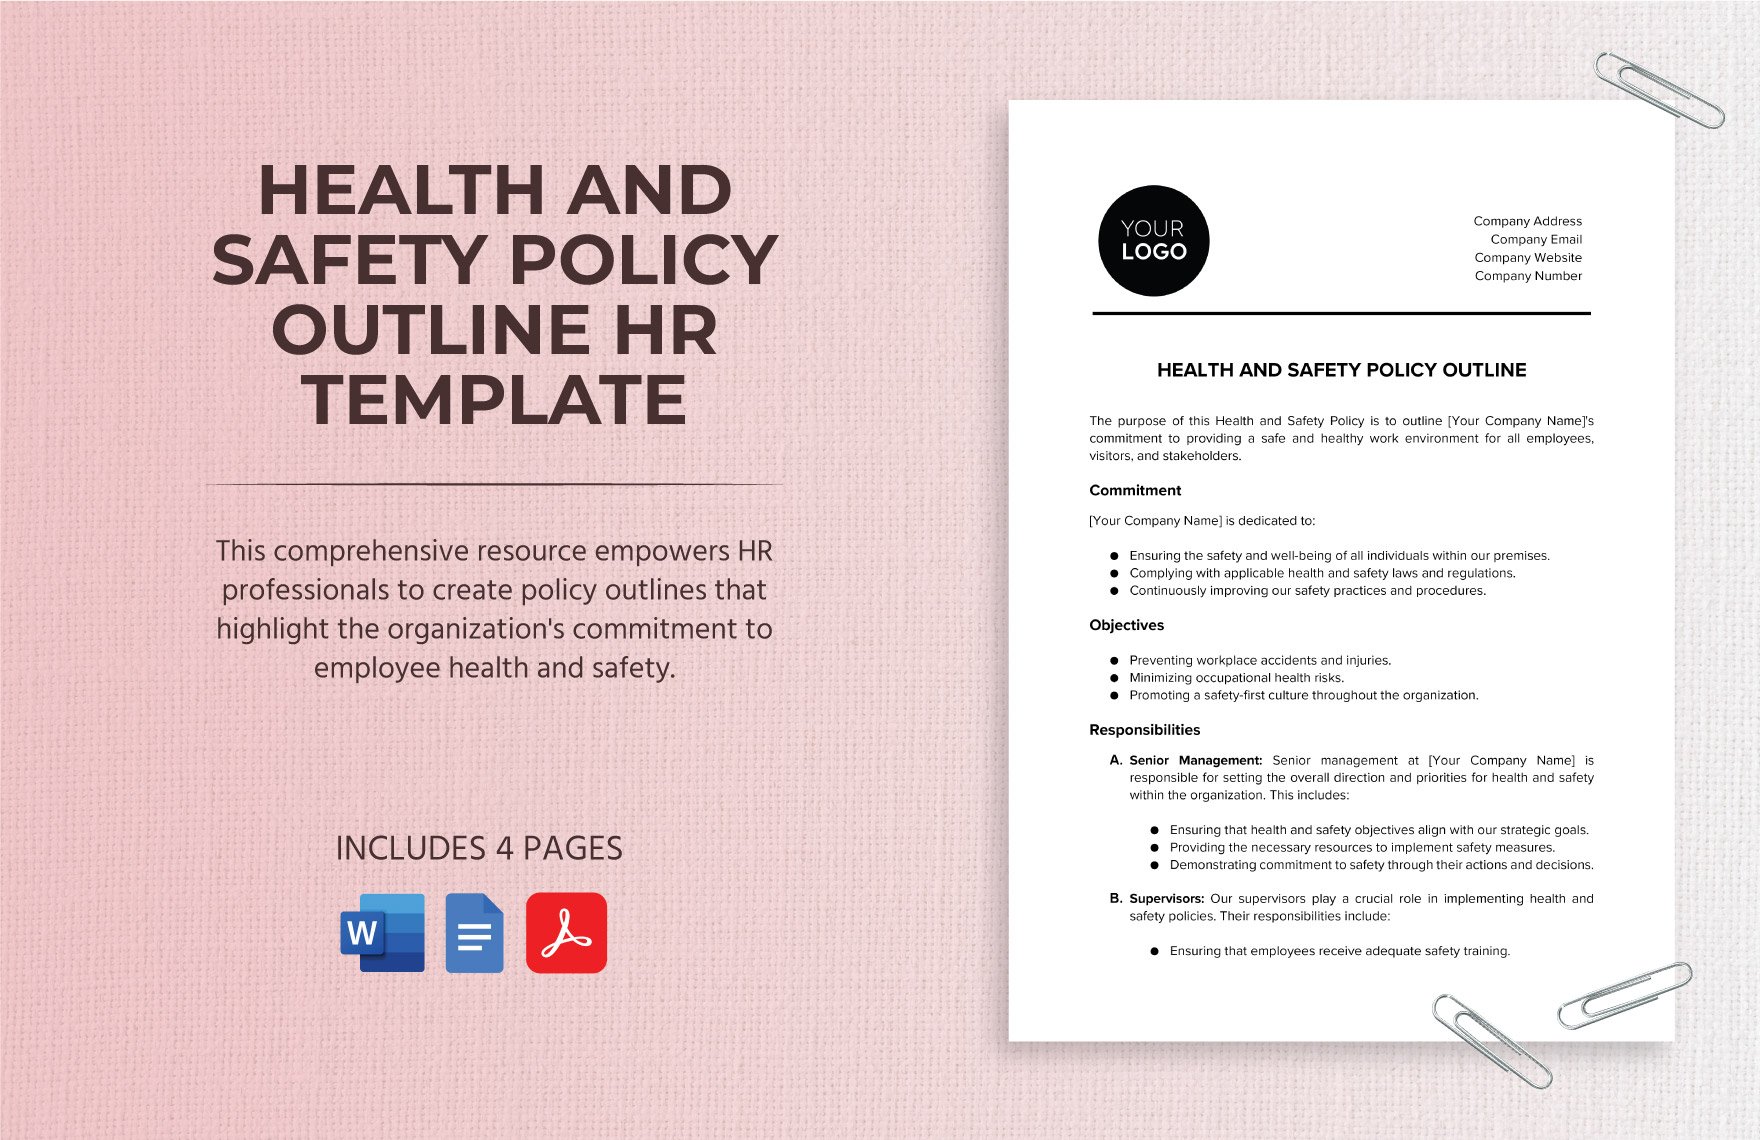 Health and Safety Policy Outline HR Template